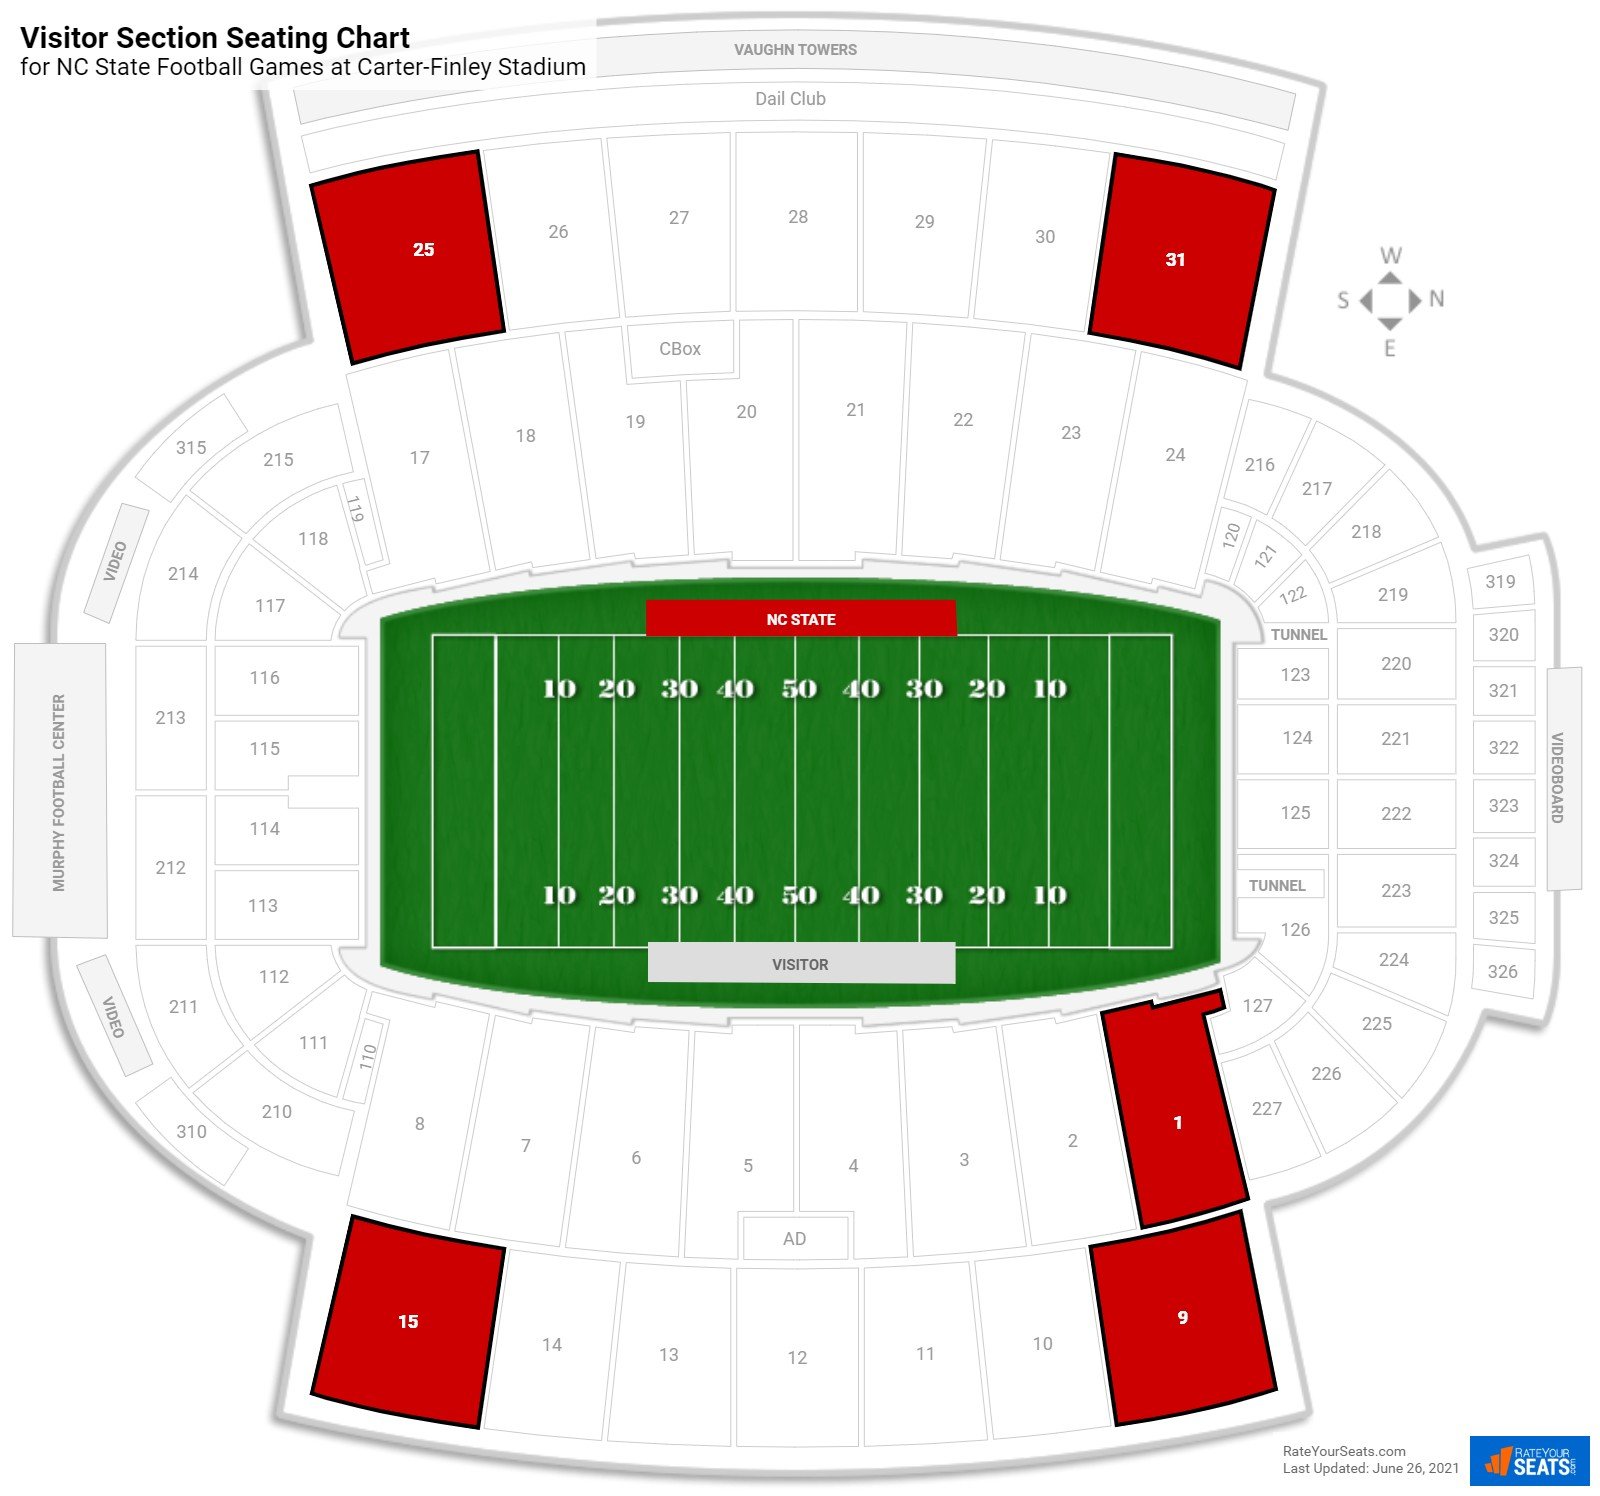 NC State Visitor Section Seating Chart at Carter-Finley Stadium